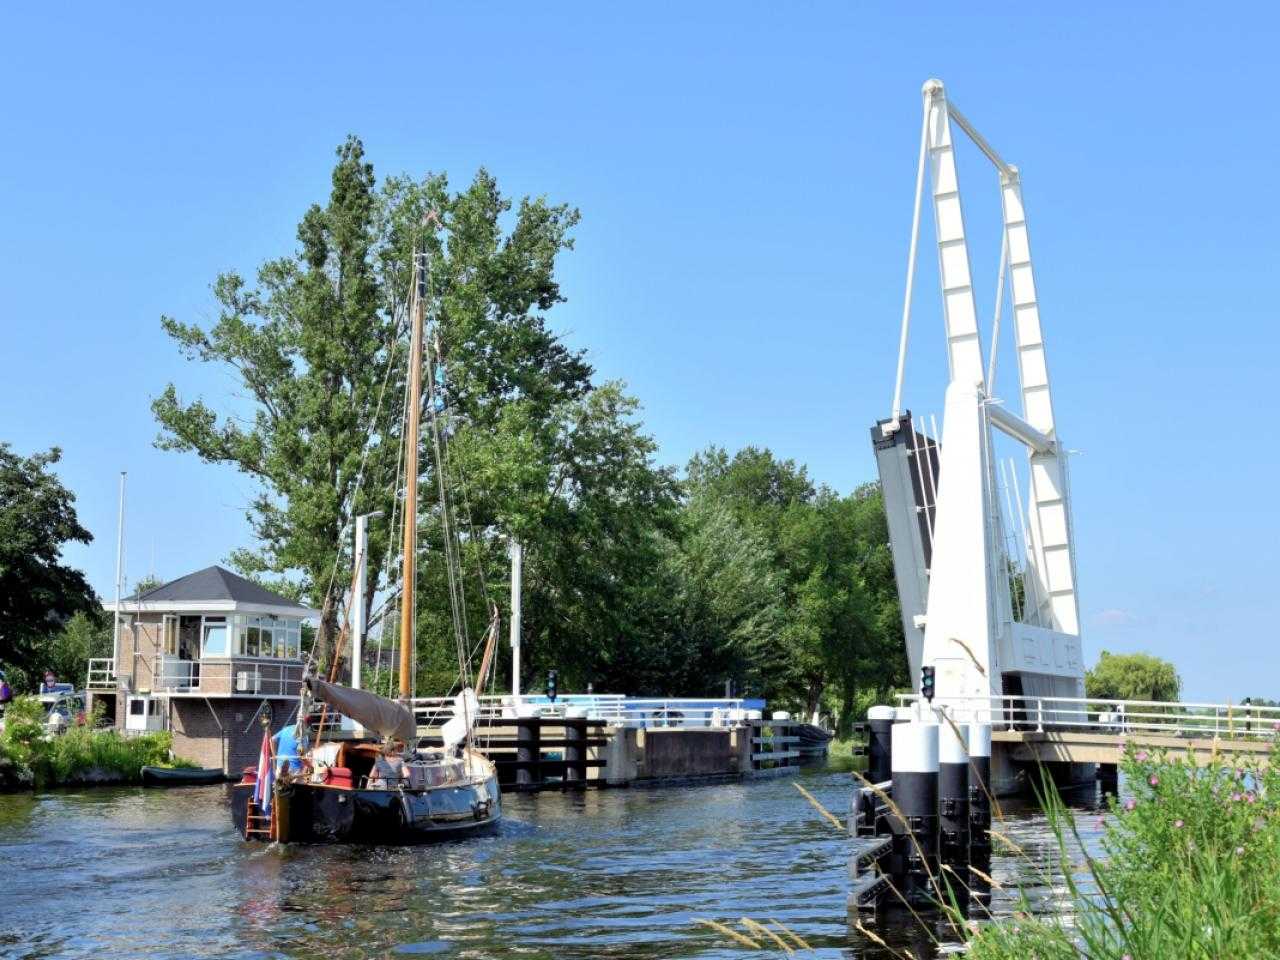 Ringvaart near Beinsdorp with a boat.